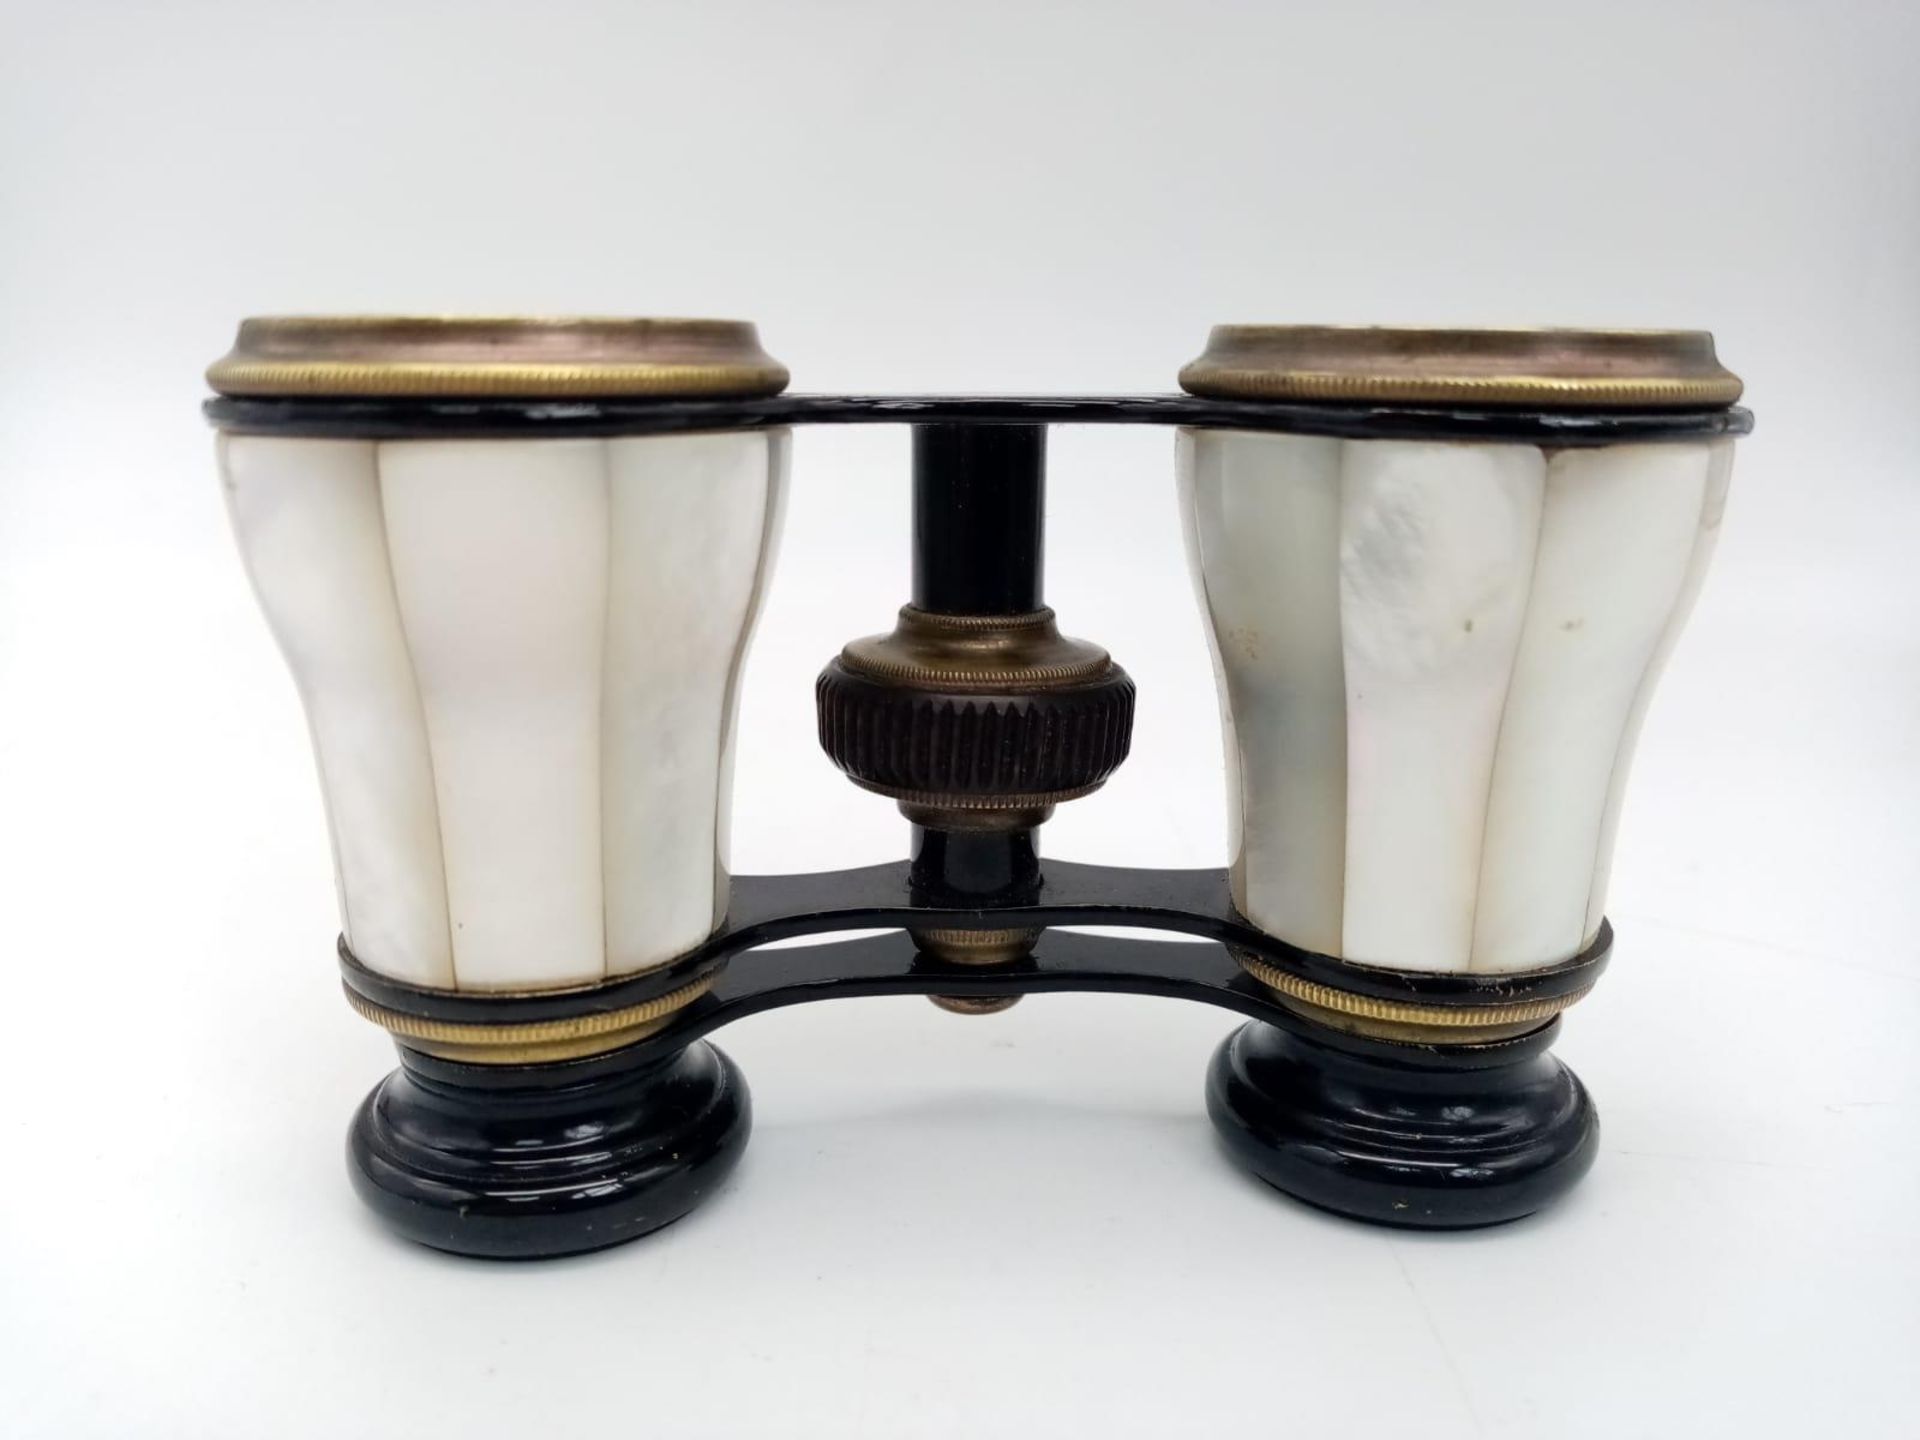 A BEAUTIFUL ANTIQUE OPERA BINOCULARS WITH MOTHER OF PEARL INLAY WORKING ORDER GREAT CONDITION - Image 3 of 4